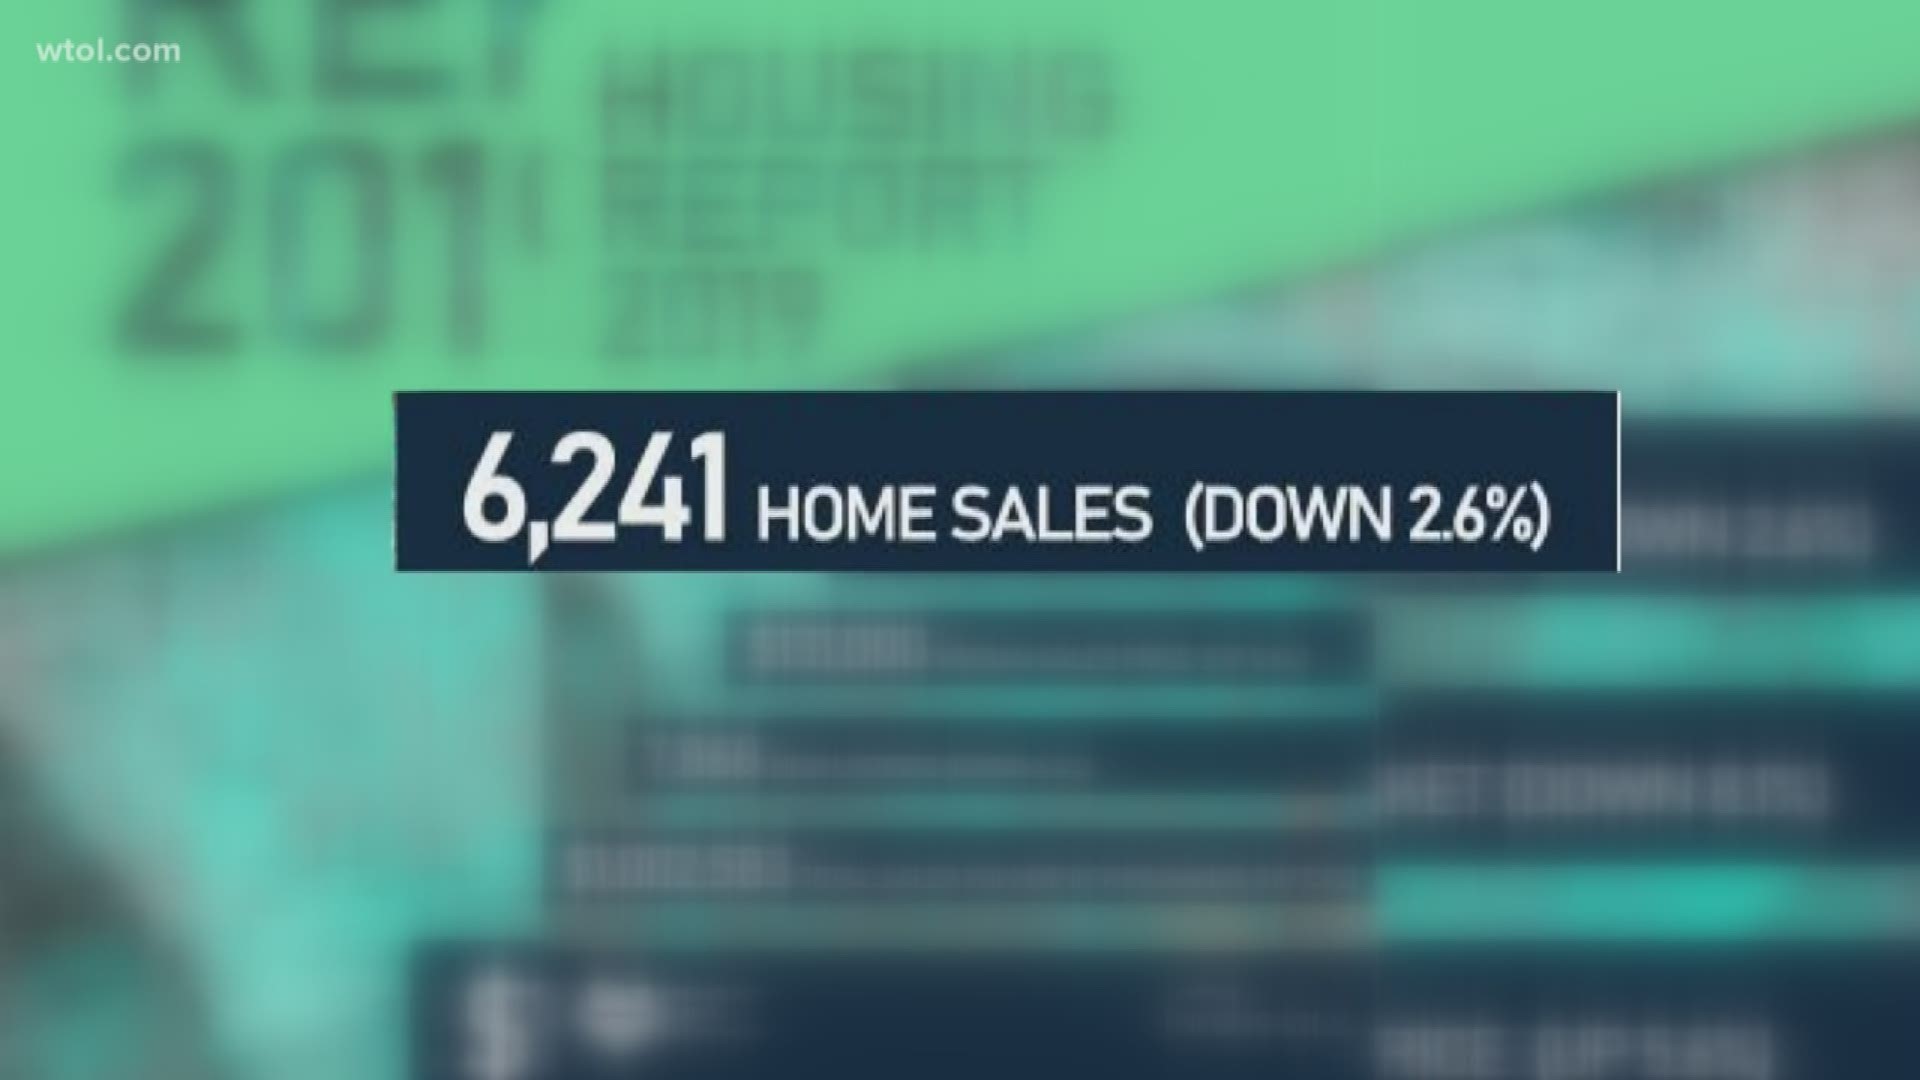 Are you looking to buy or sell a house this year?
New information from 2019 sales shows the housing market will likely stay strong for 2020.